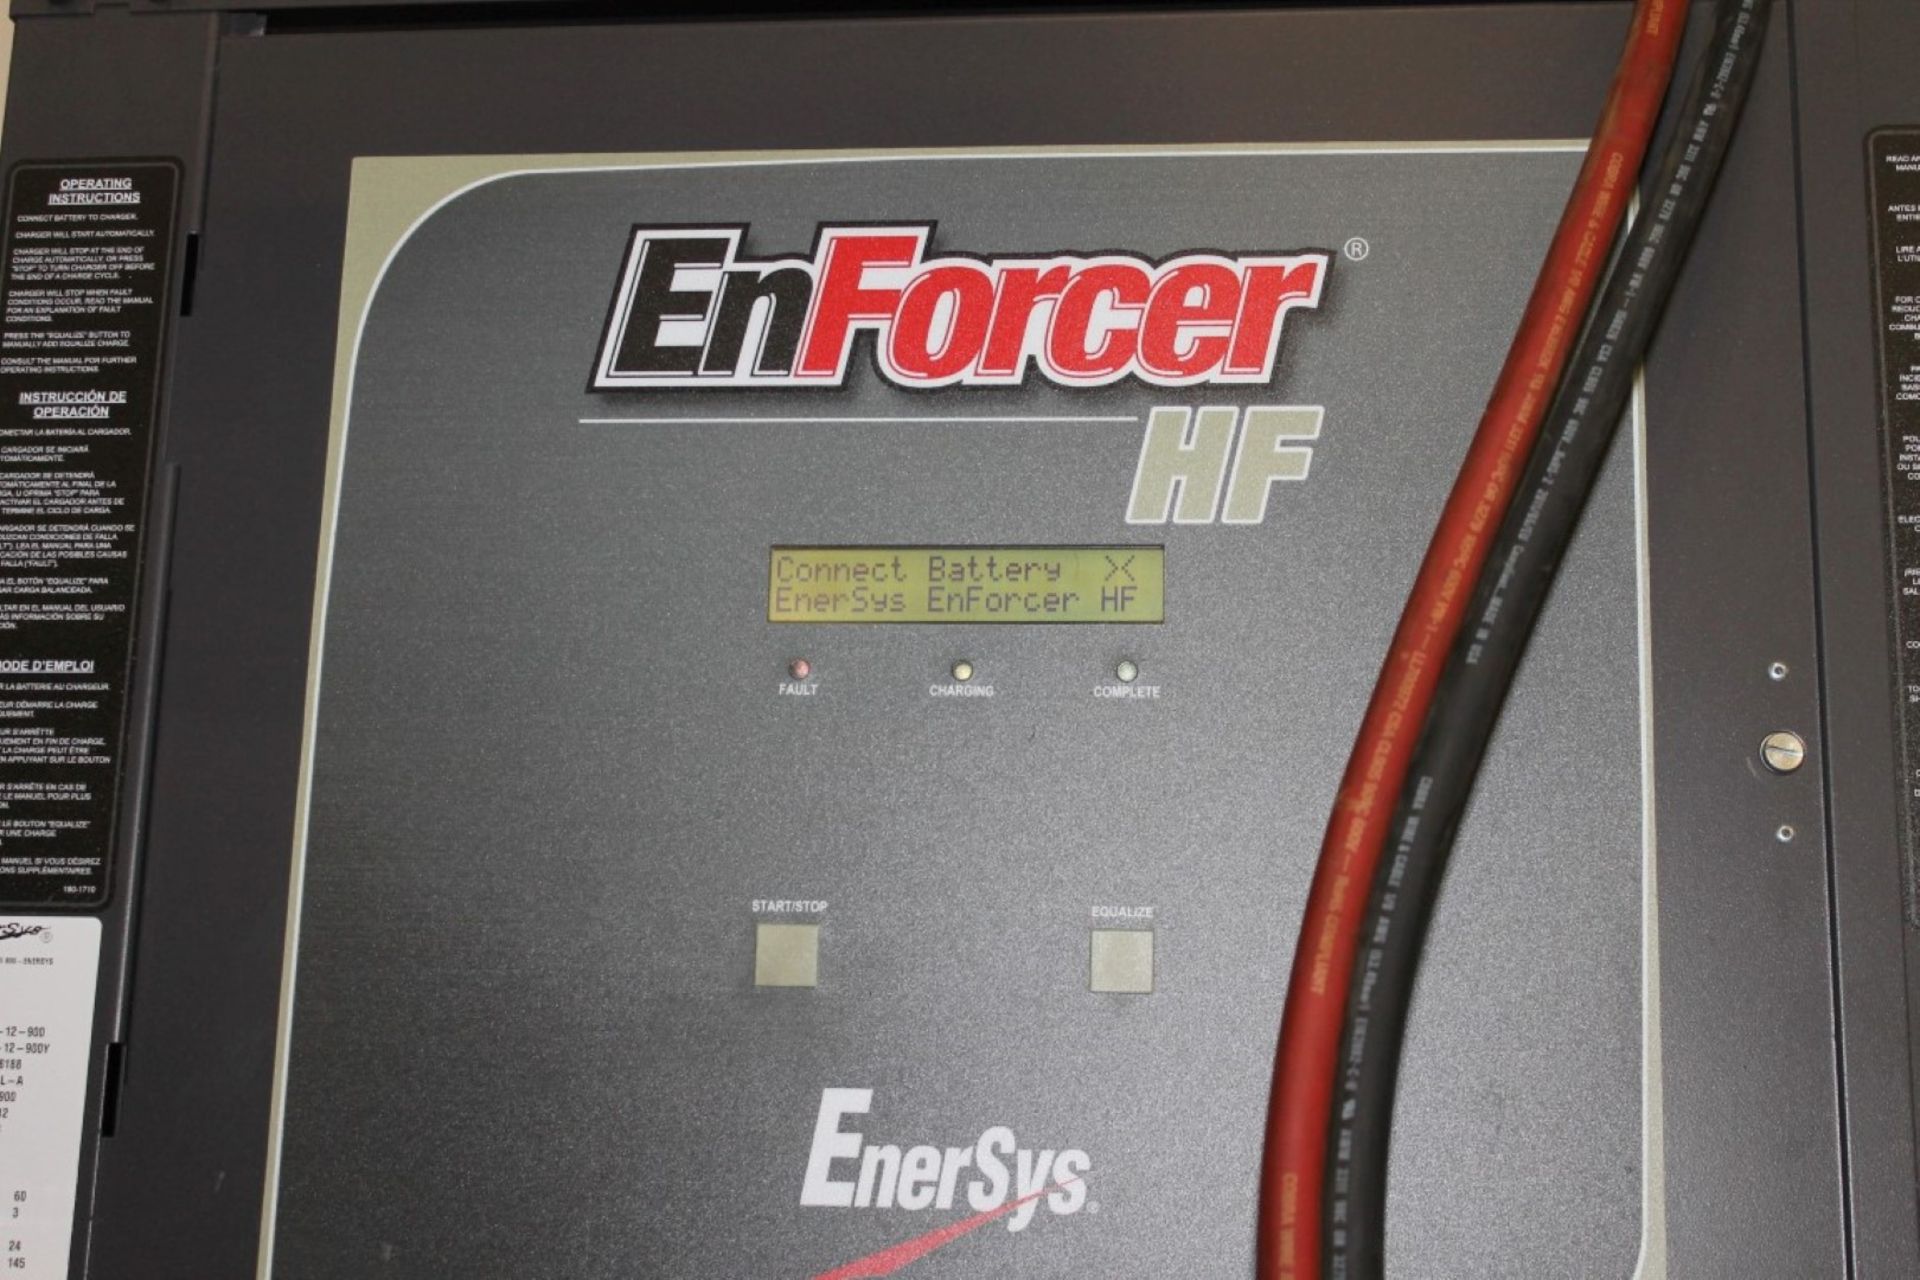 ENERSYS 24 VOLTS INDUSTRIAL BATTERY CHARGER, 900 AMP HRS, ENFORCE HF - Image 2 of 3